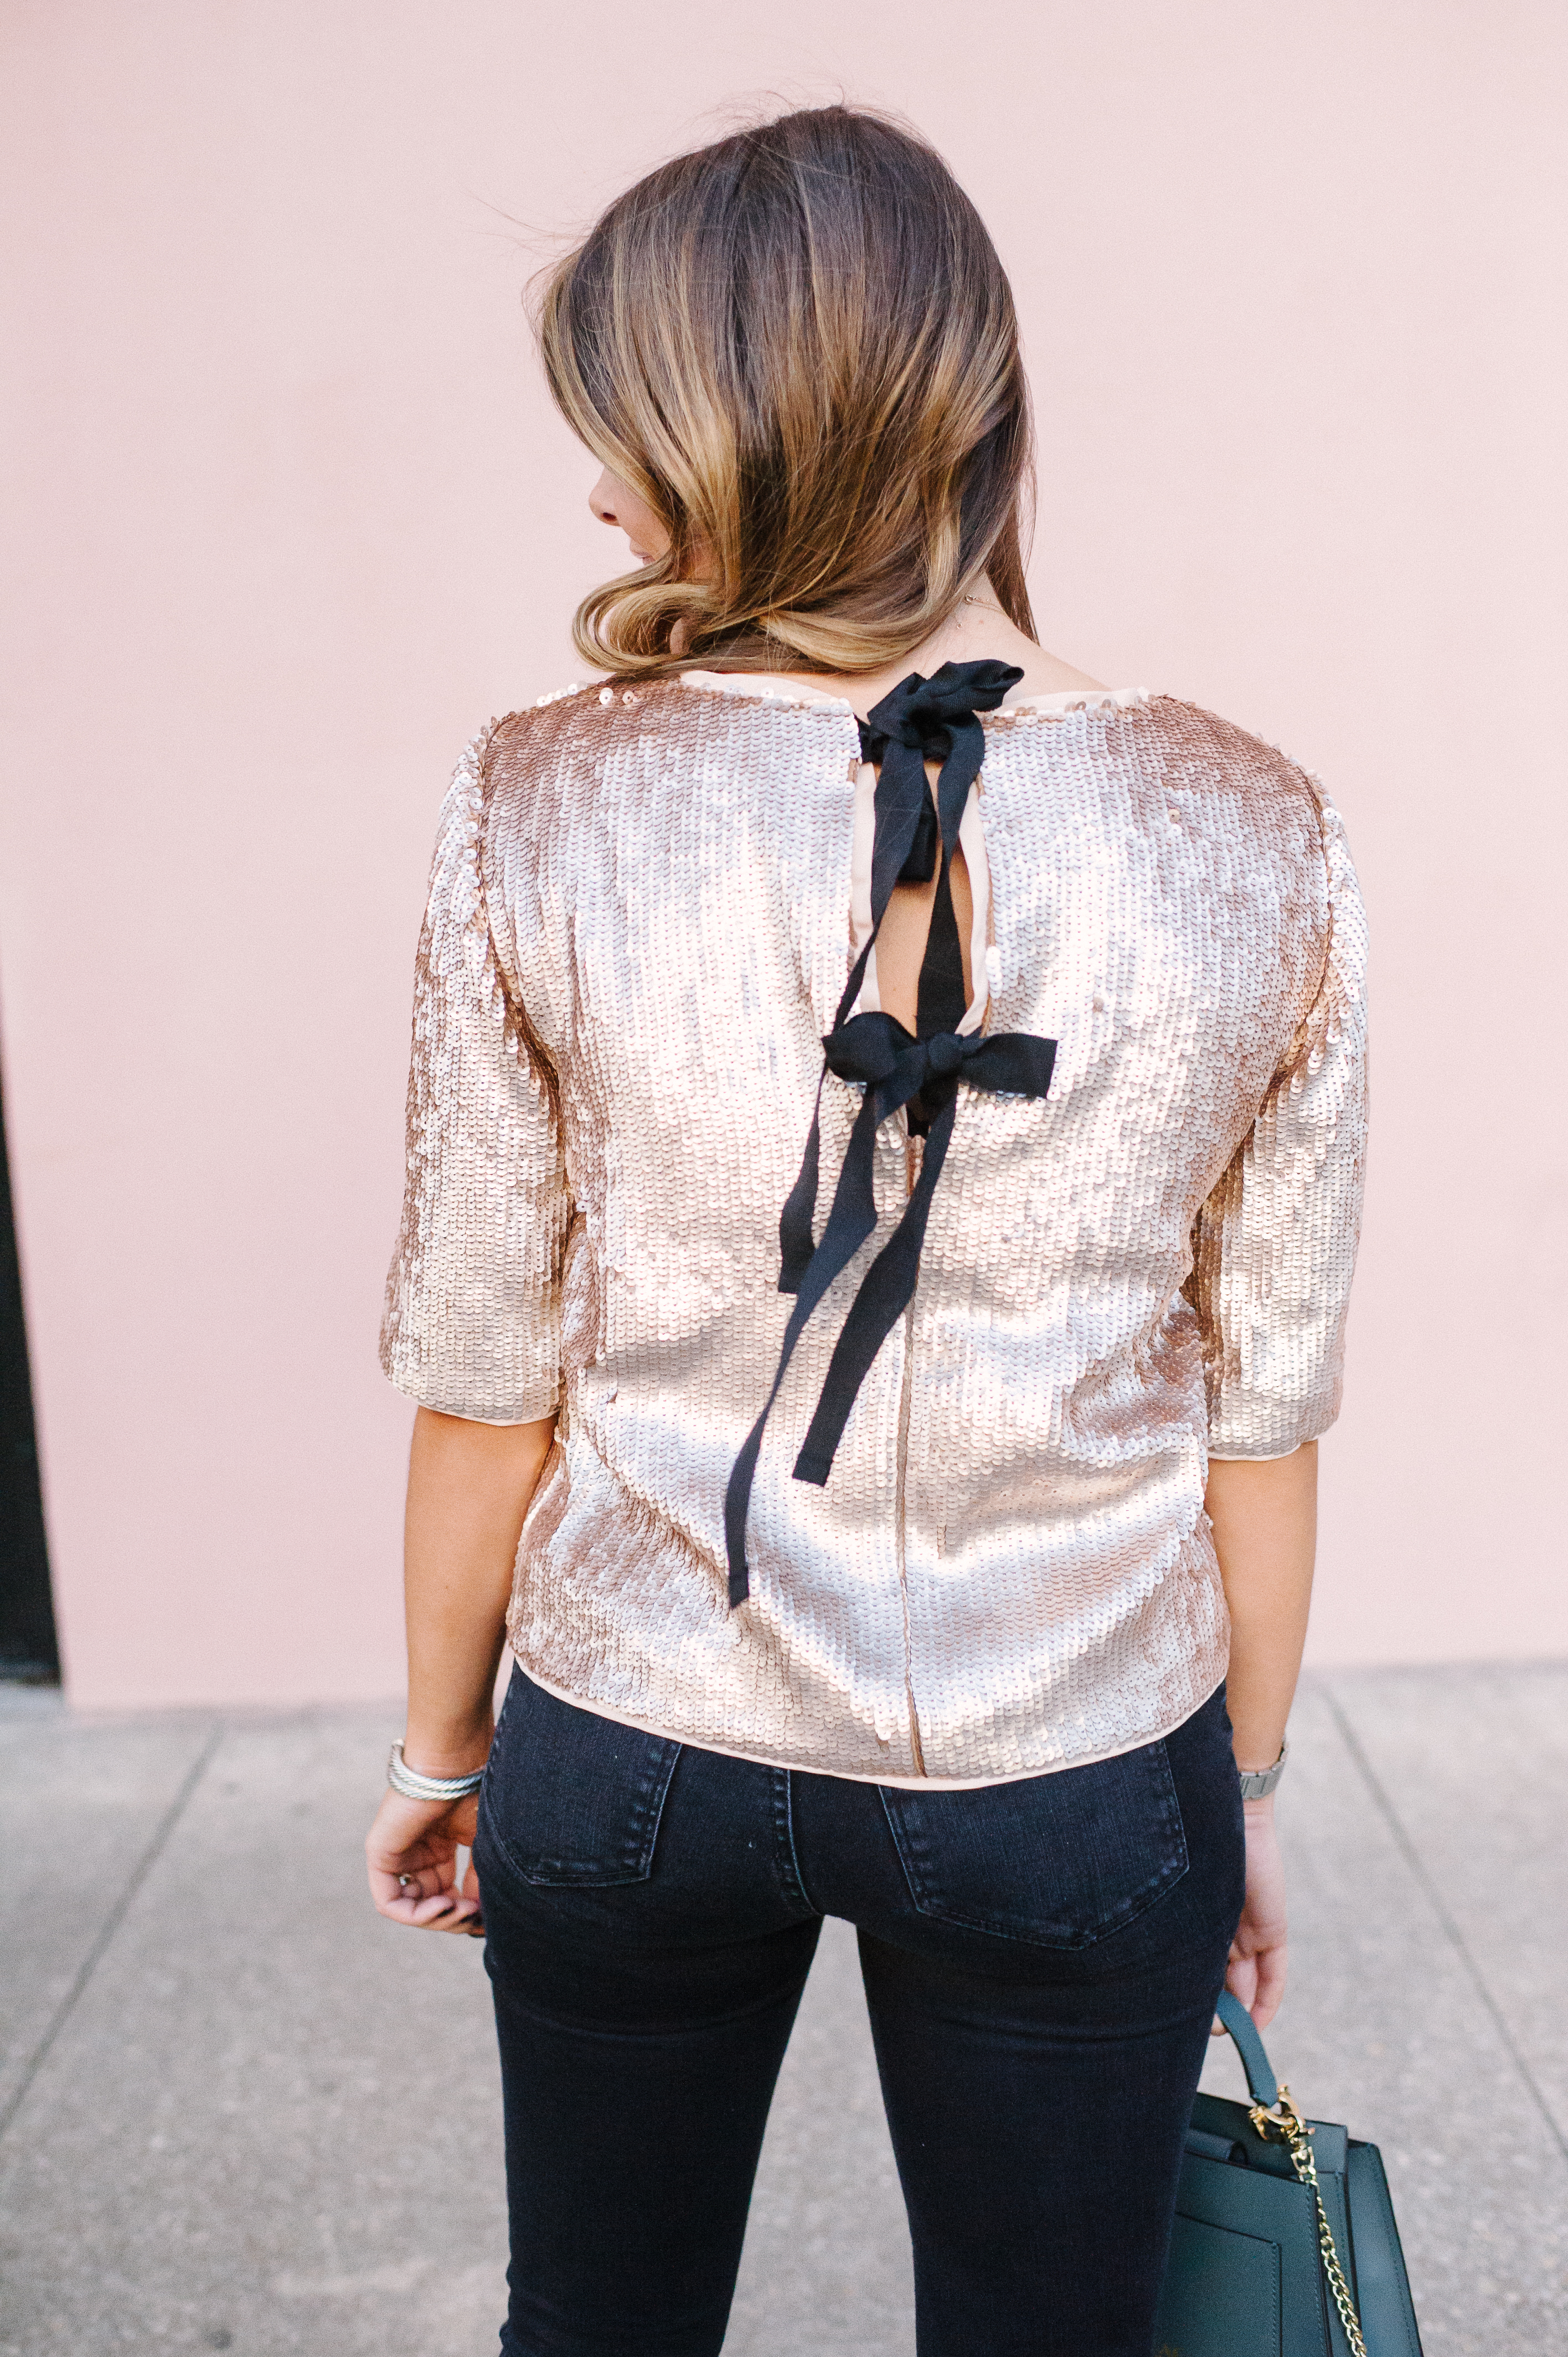 J Crew Sequin Top / Holiday Outfit Idea / Charleston, SC